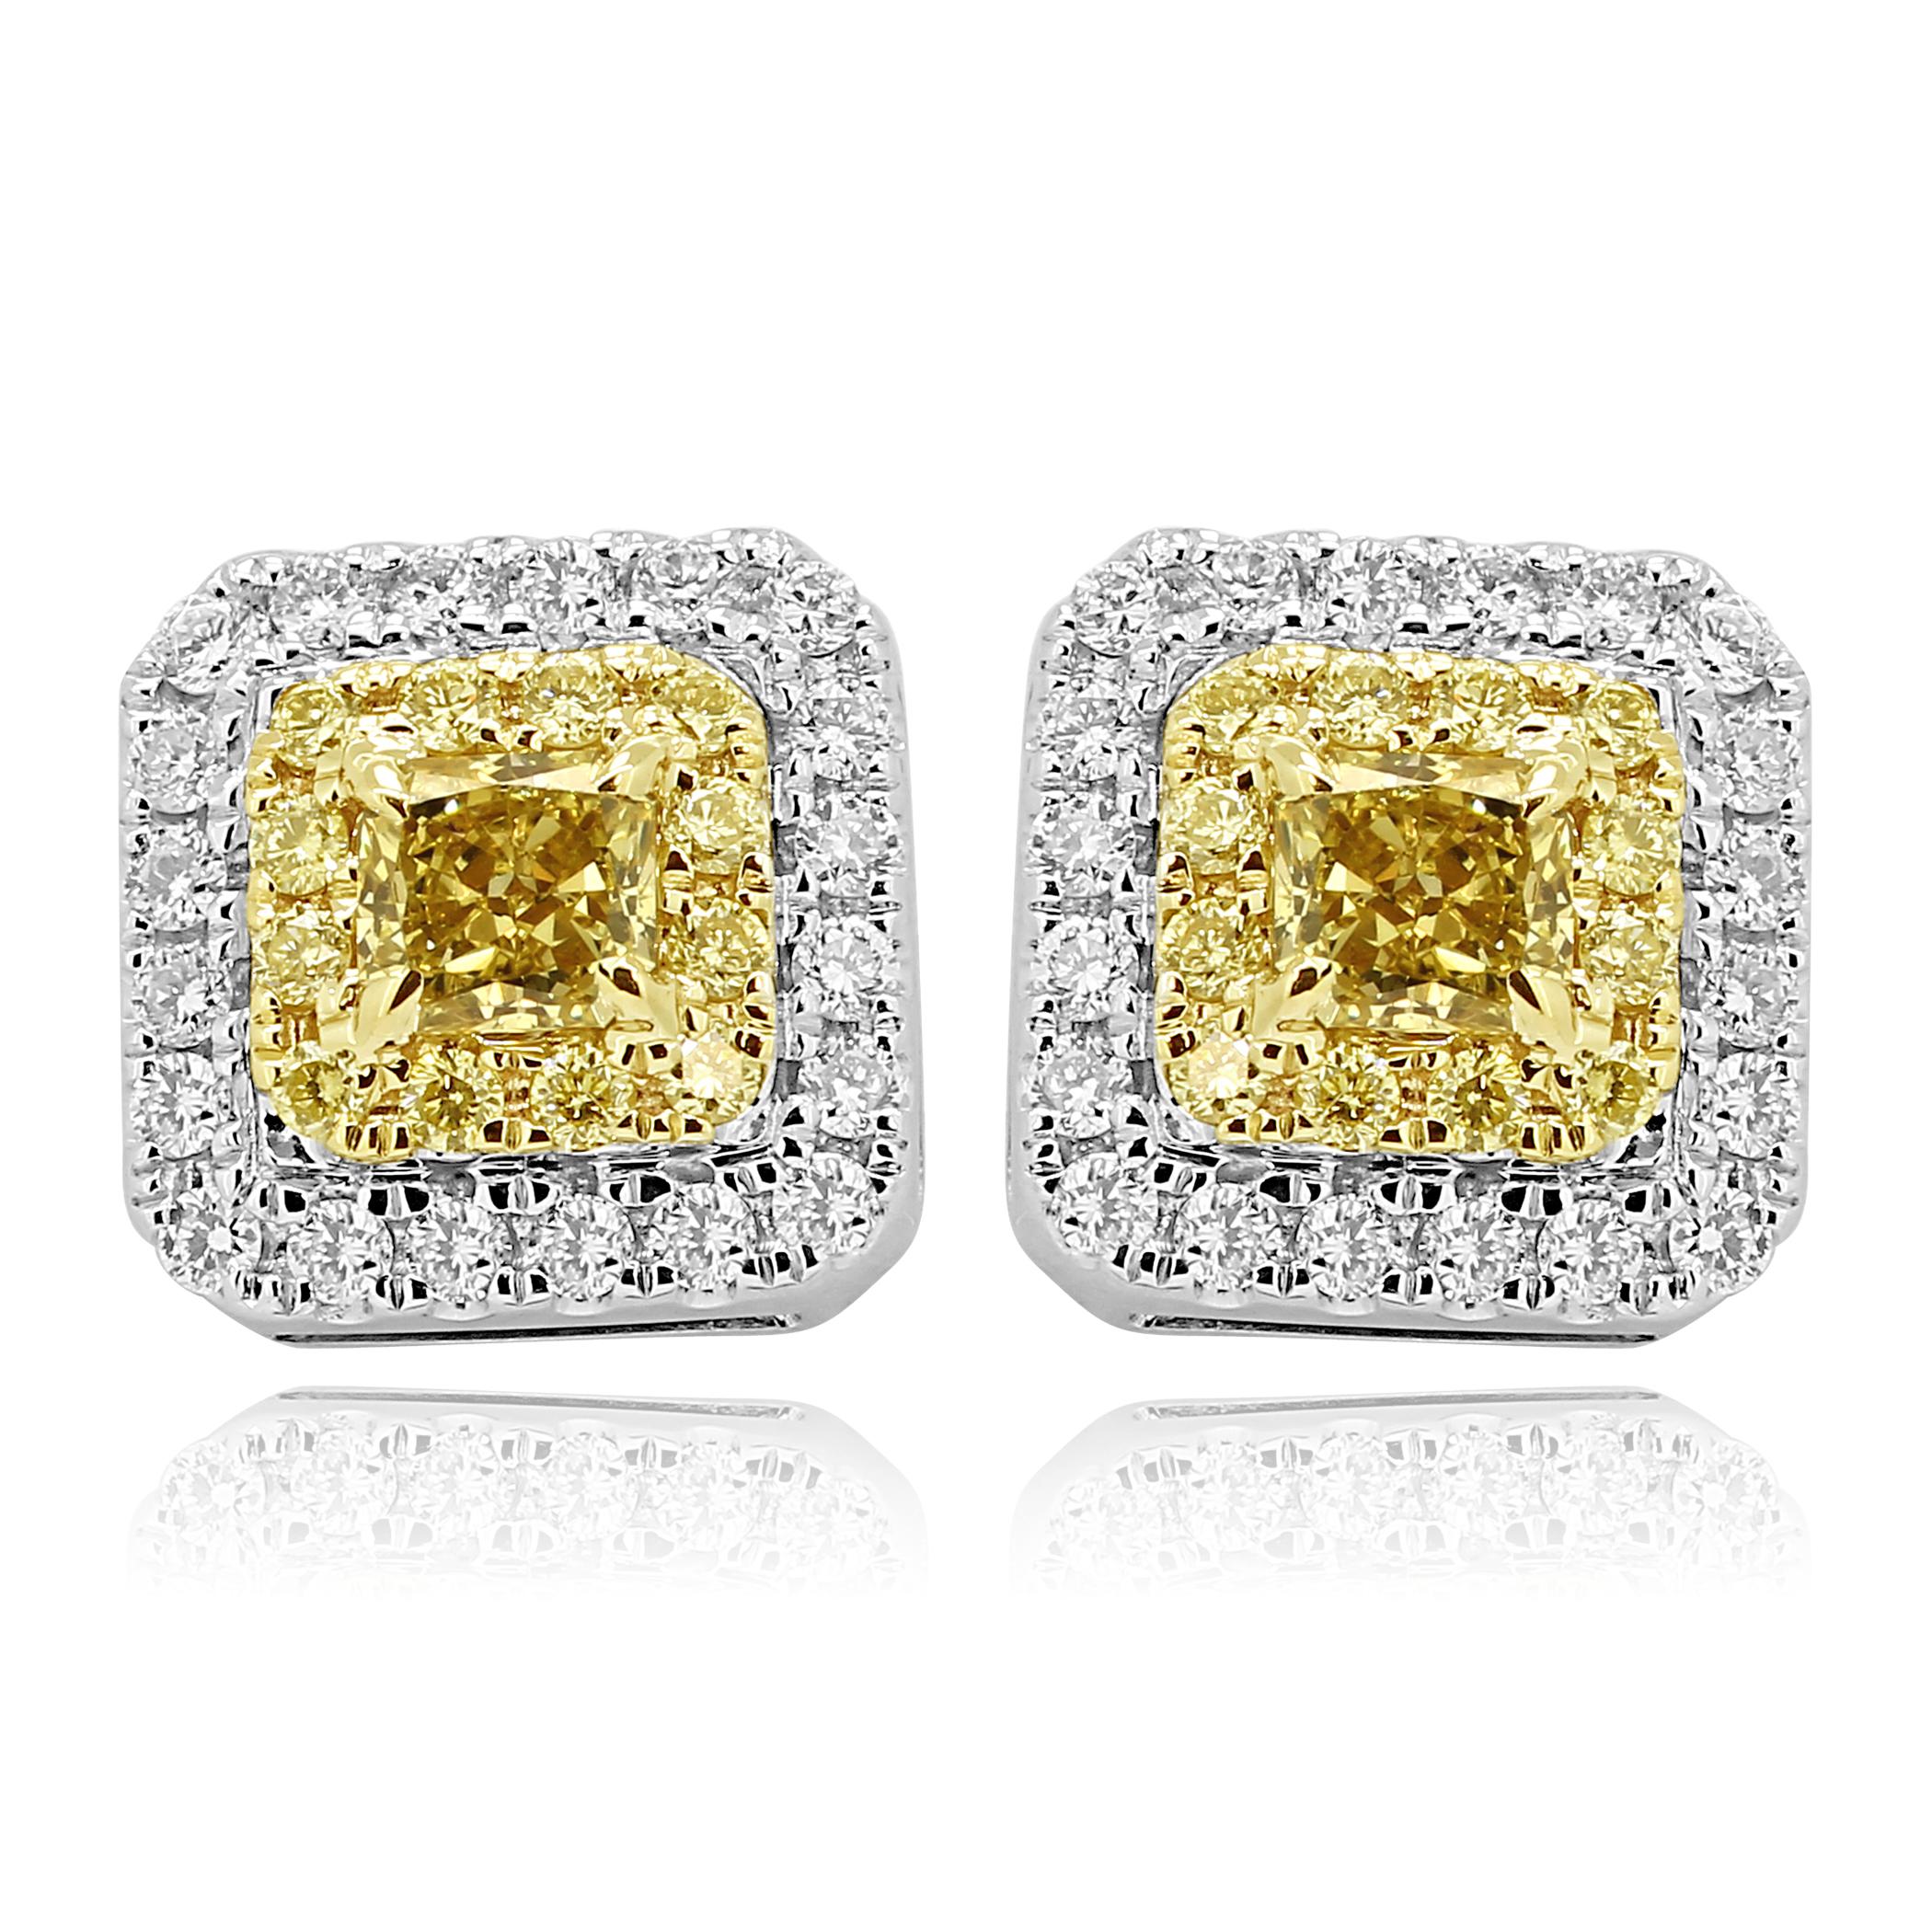 2 Natural Fancy yellow Diamond Radiant 0.58 Carat Encircled in Double Halo of Natural Fancy Yellow Round Diamonds 0.21 Carat and White Round Diamonds 0.37 Carat in Stunning and Classic 14K White and Yellow Gold Stud Earring.

Style available in